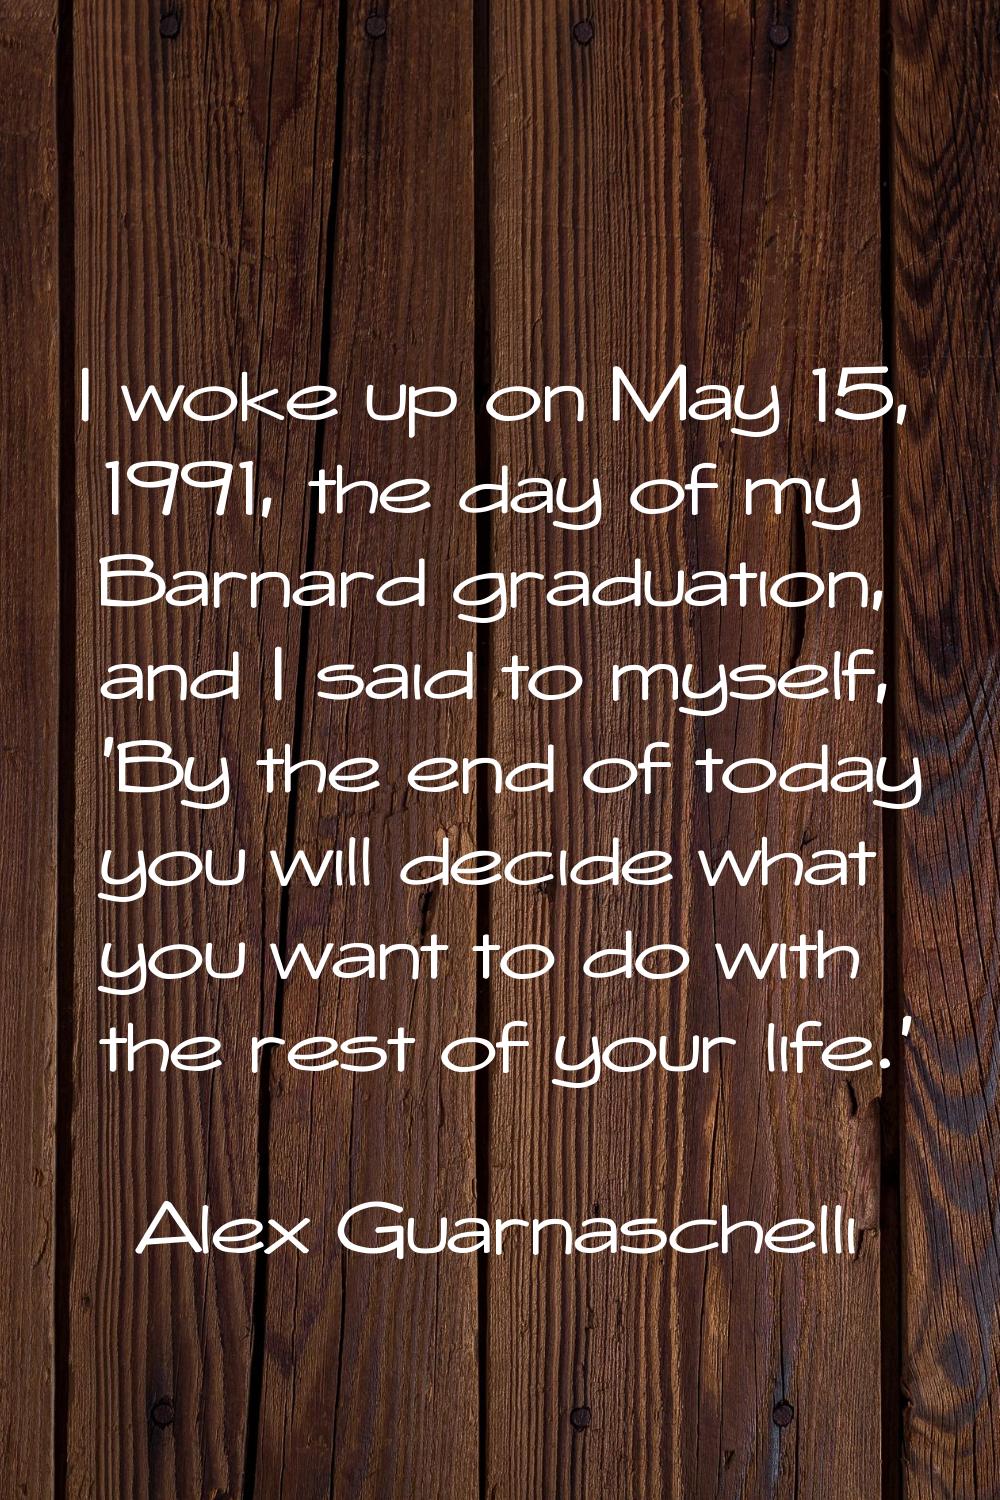 I woke up on May 15, 1991, the day of my Barnard graduation, and I said to myself, 'By the end of t